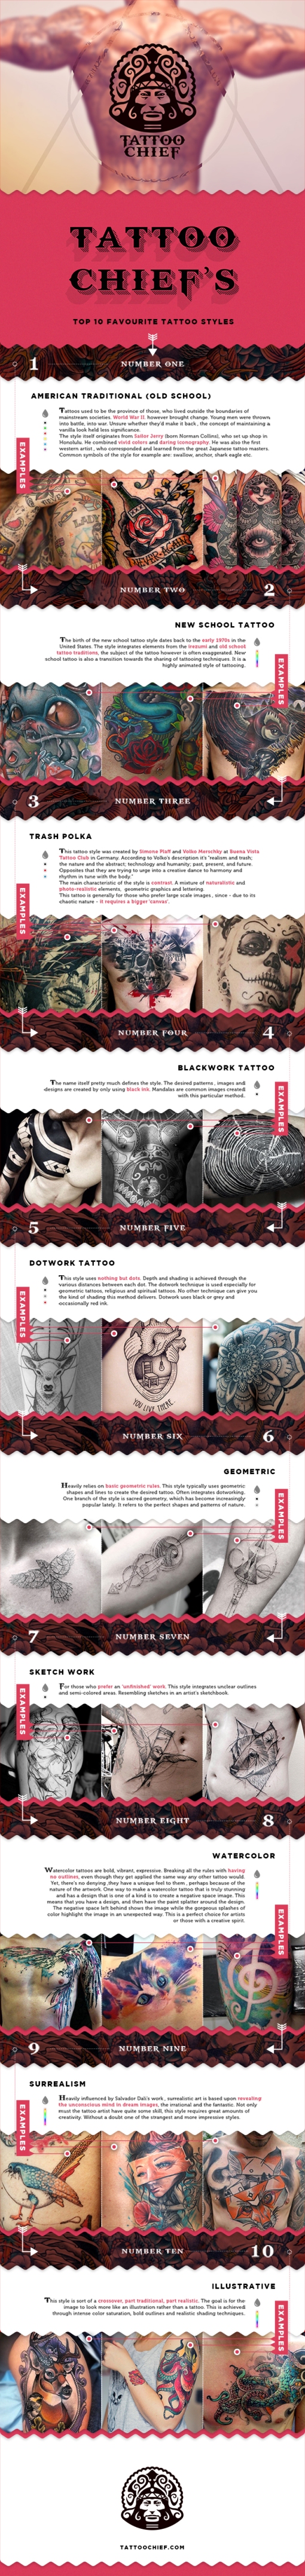 TattooInfographic